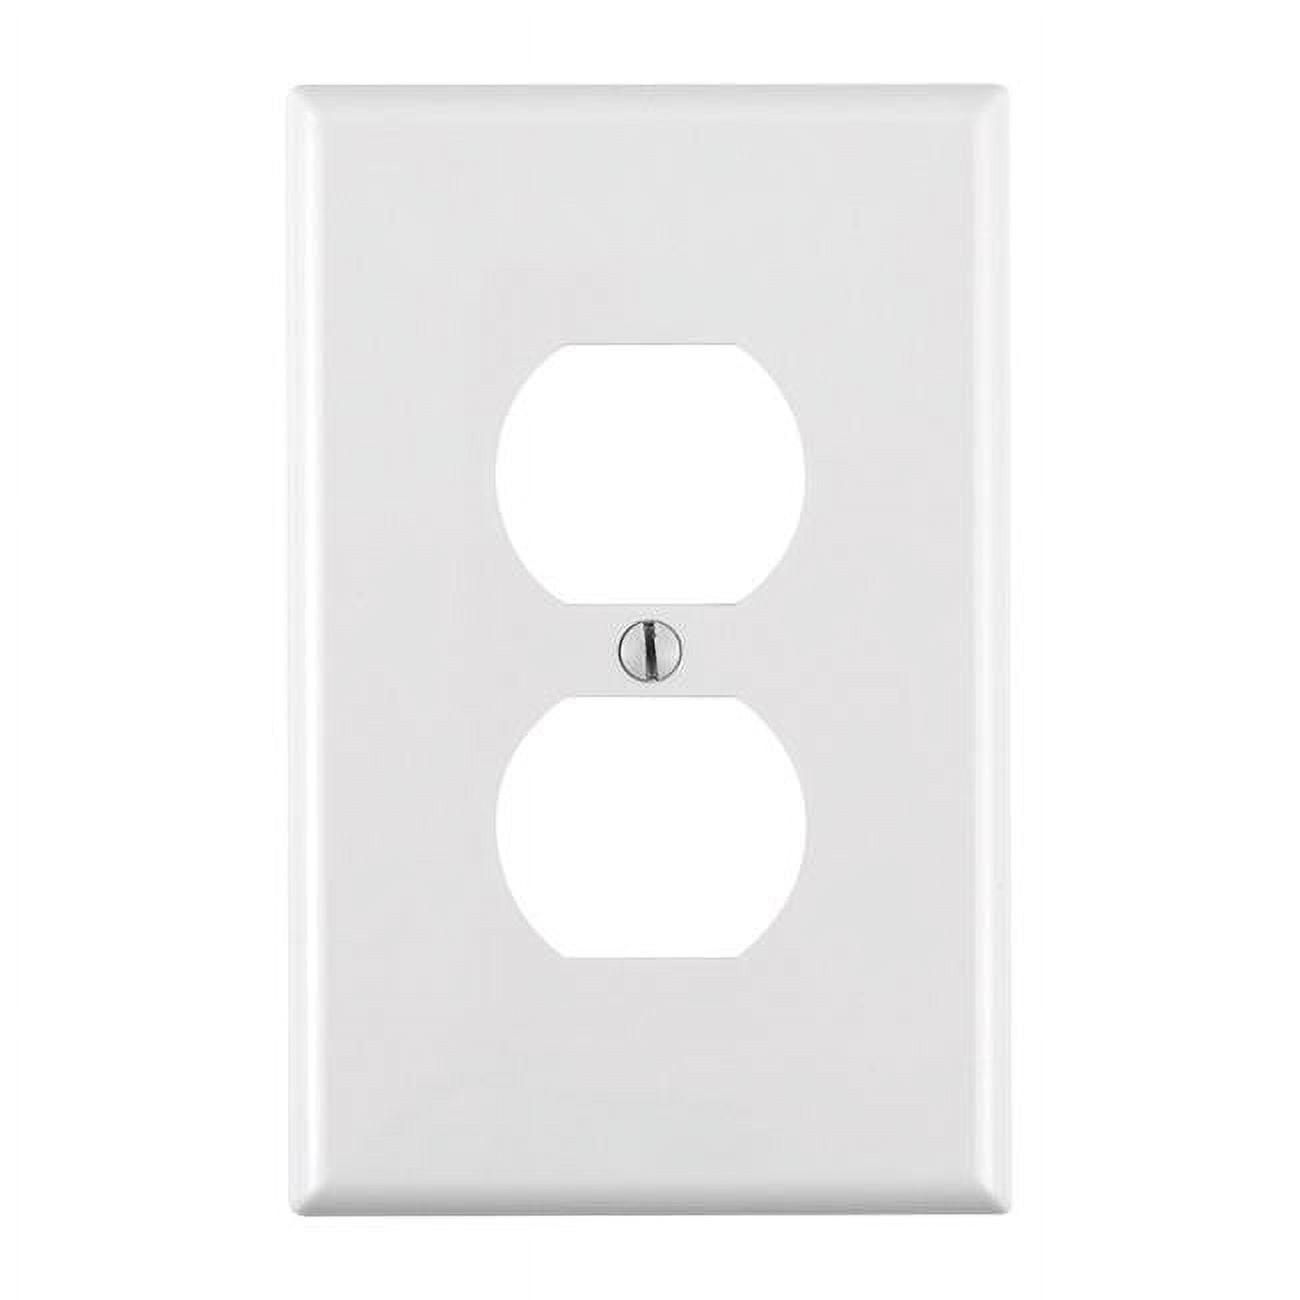 00pj8-00w 1-gang Duplex Device Receptacle Wall Plate White- Pack Of 20